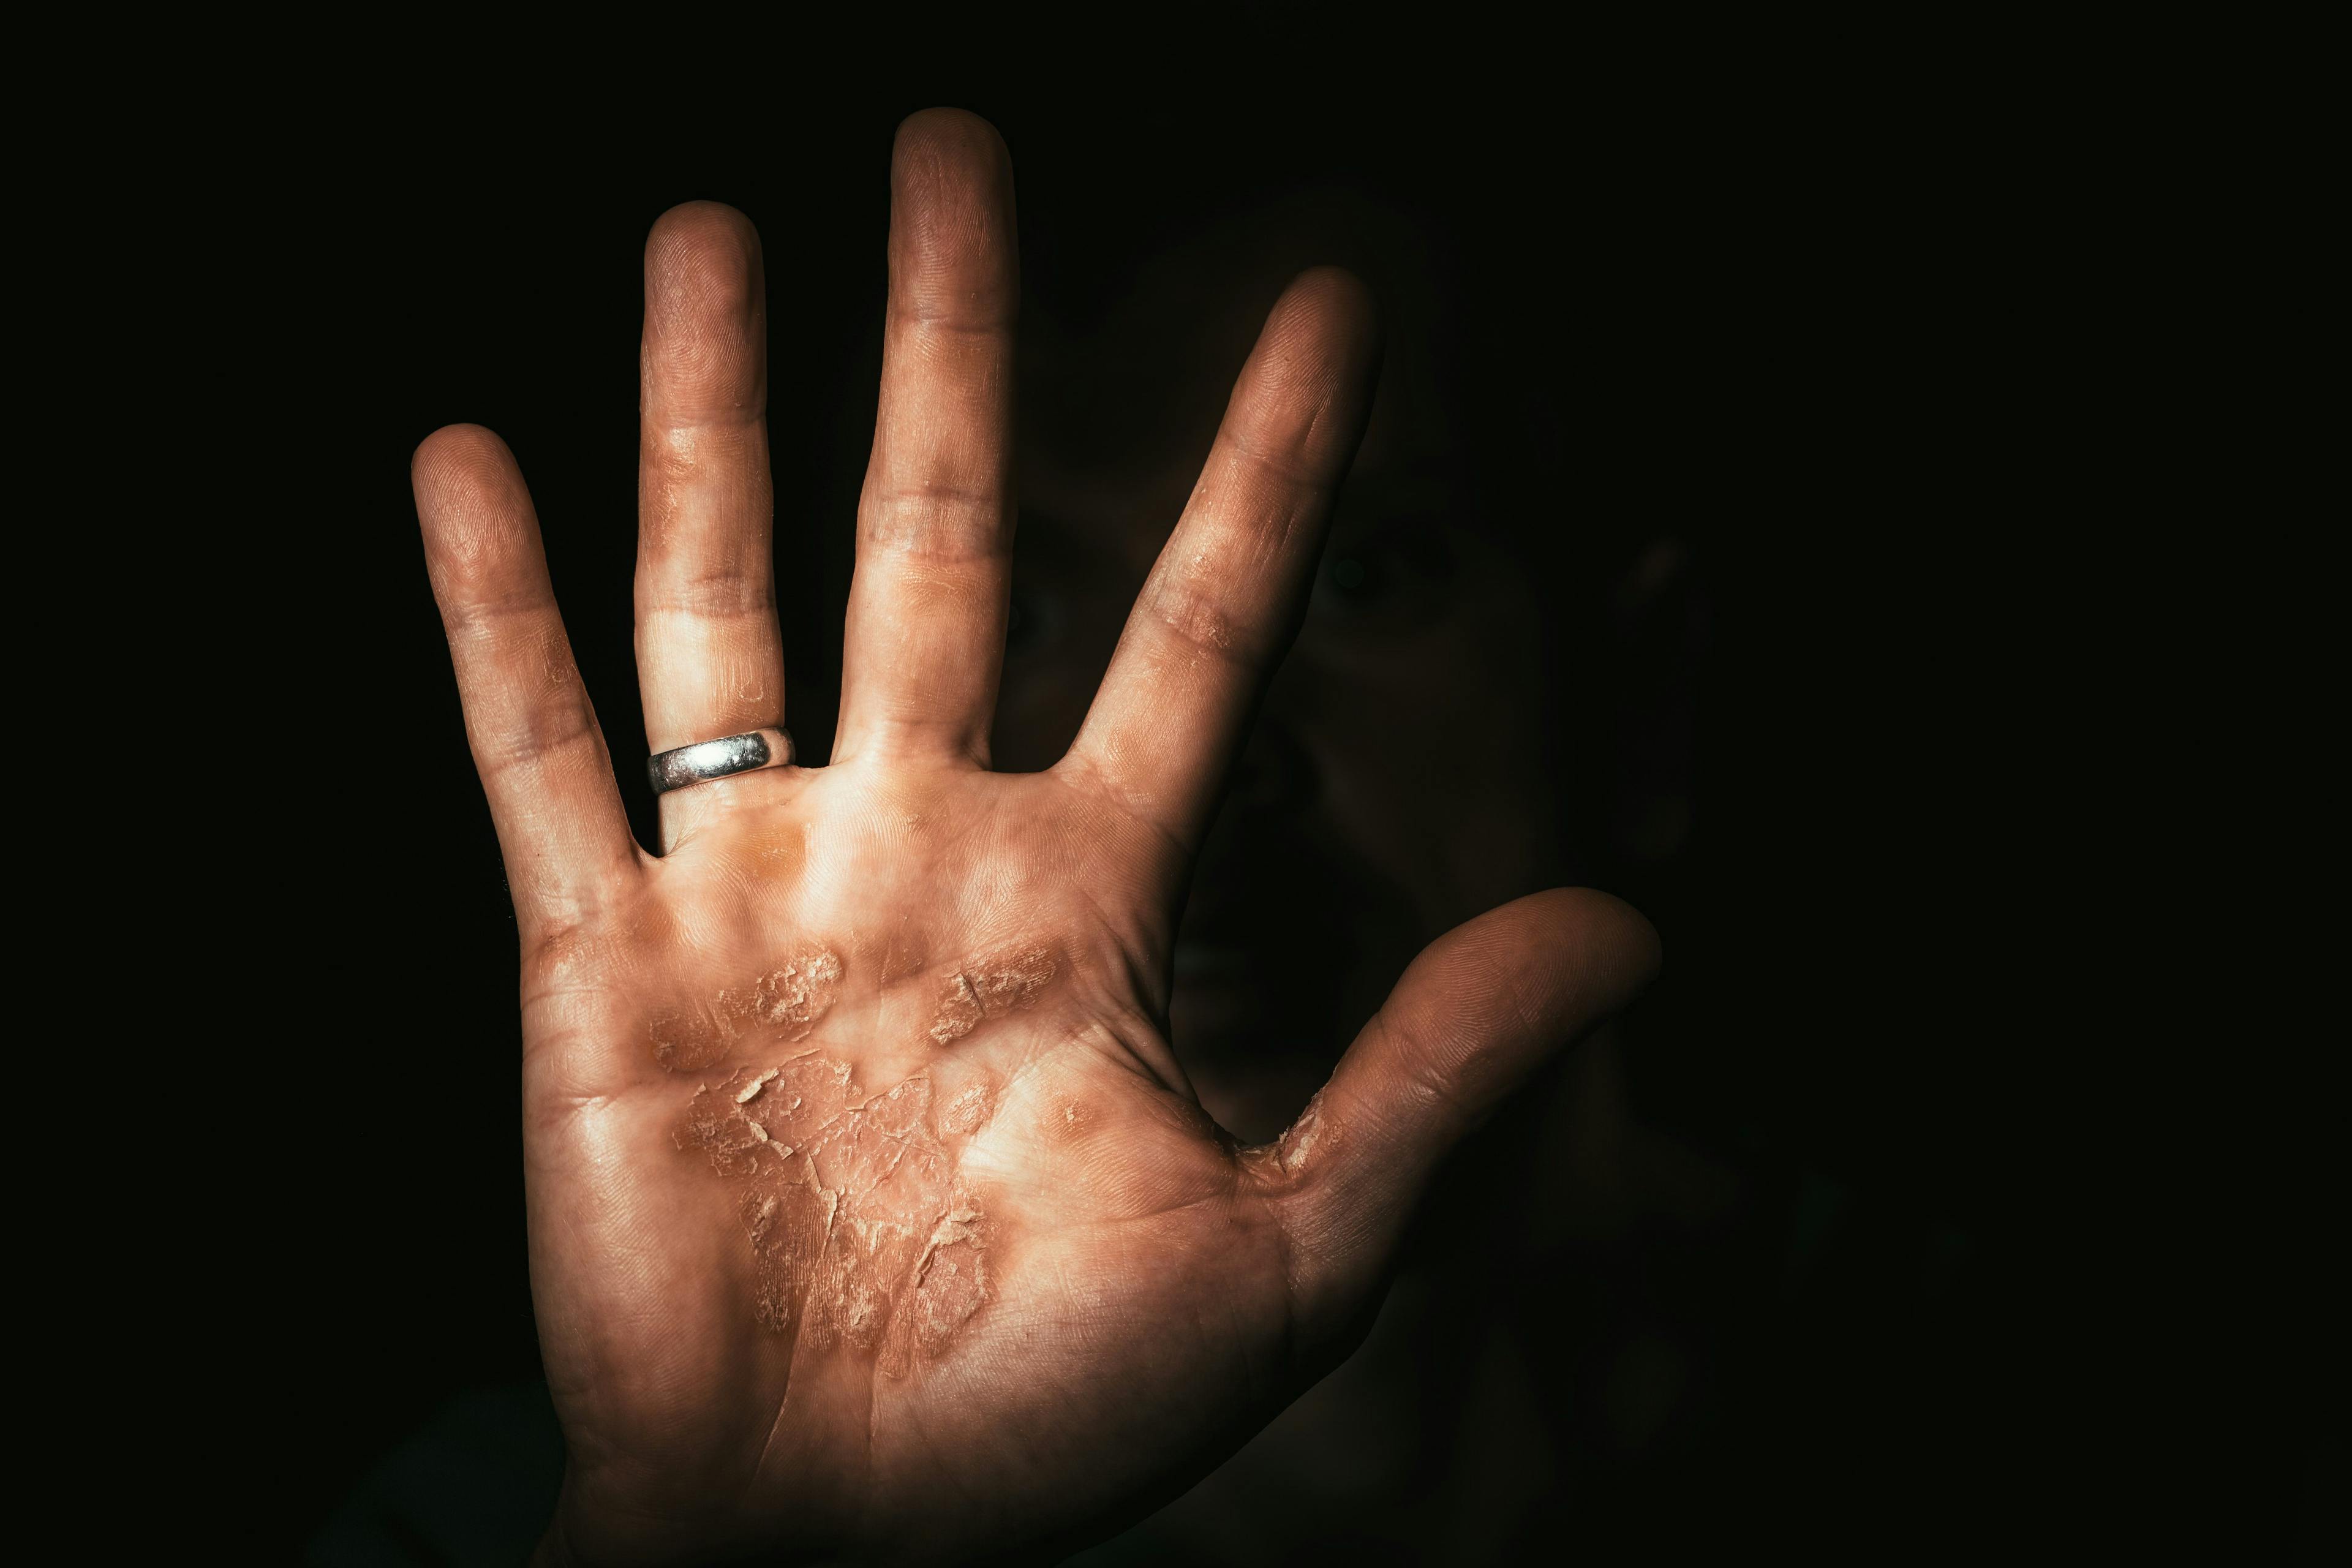 dark hand of a worker with b calluses protests. Stop | vovan - stock.adobe.com